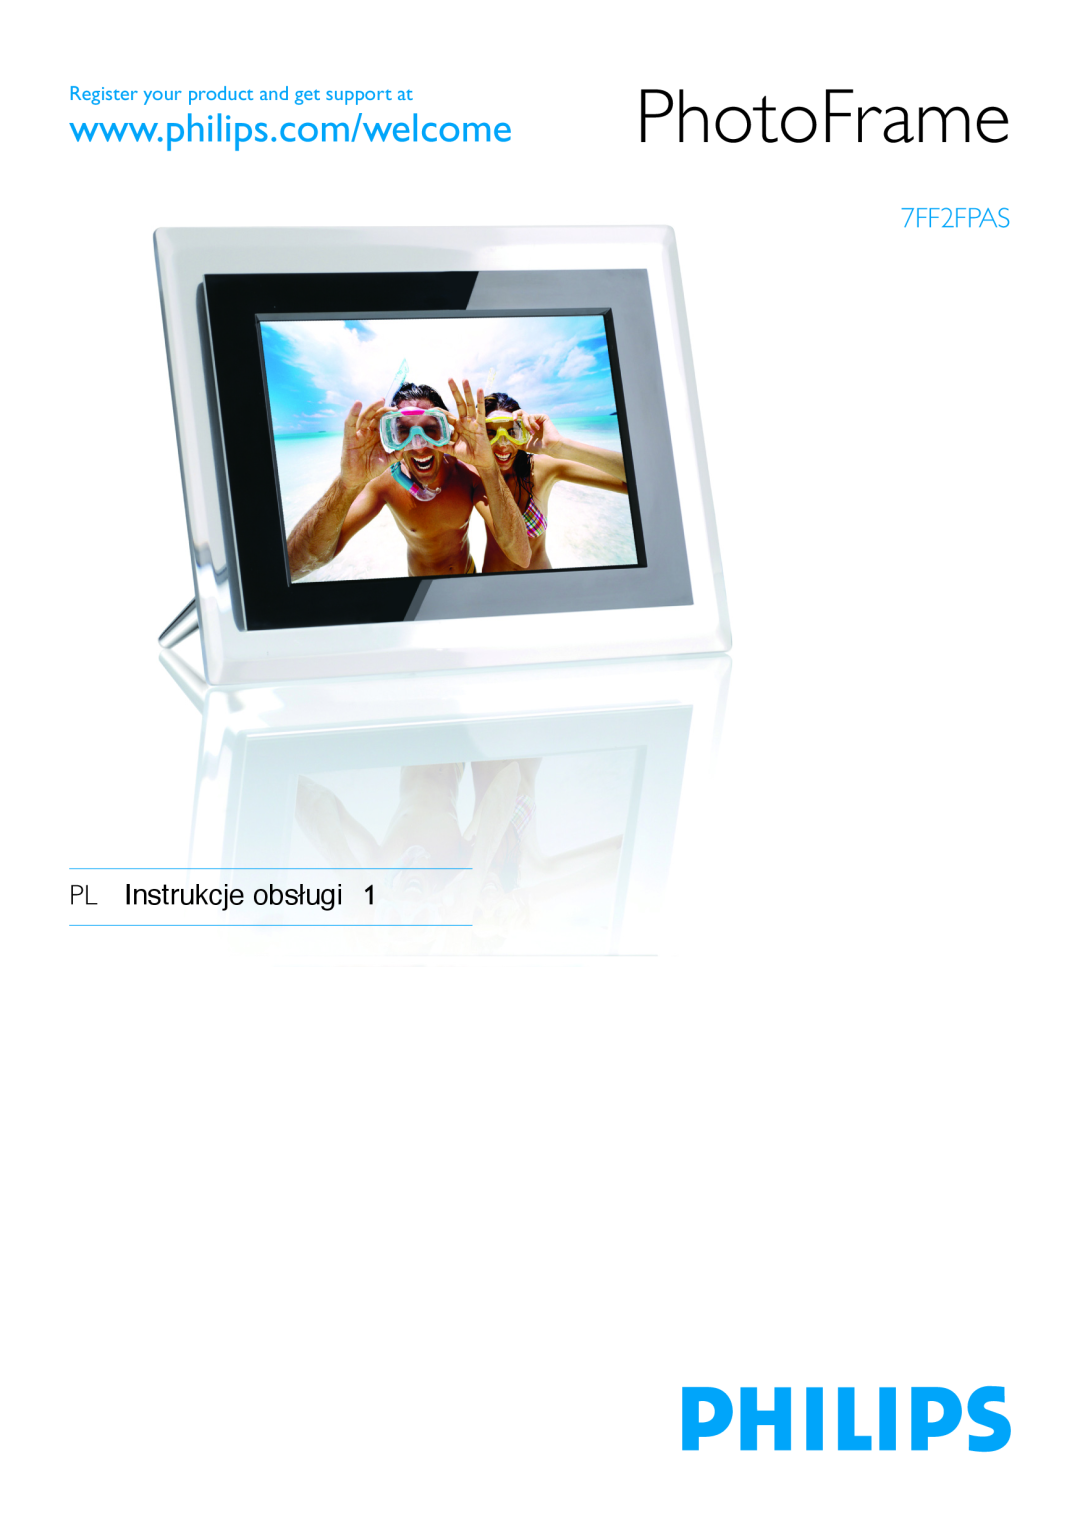 Philips 7FF2FPAS manual PhotoFrame, Tc 使用者手冊, Register your product and get support at 